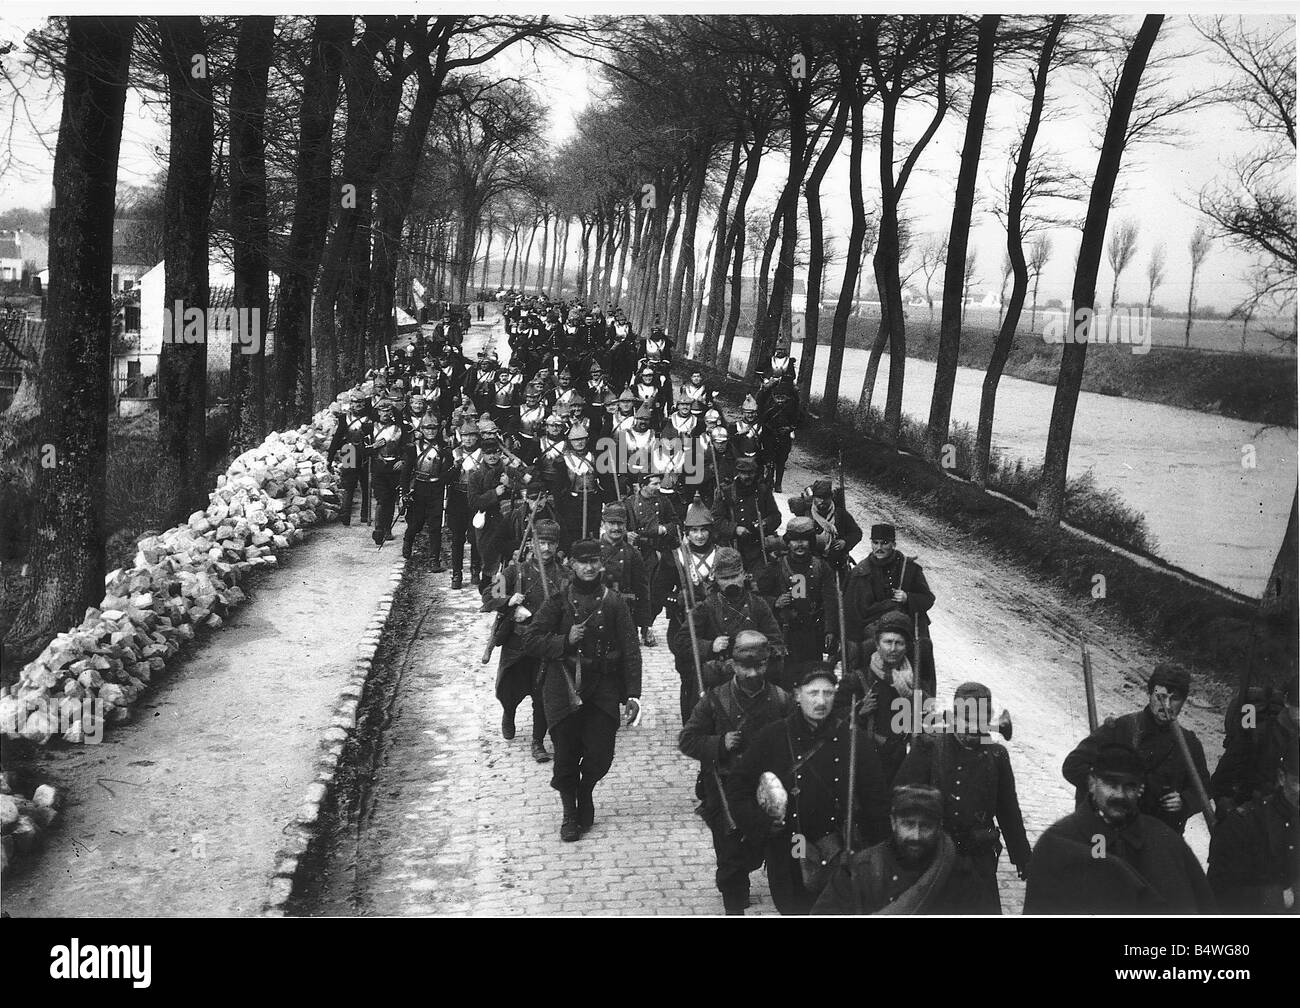 French Dragoons on the march DM 1228 Box 3 September 1914 Paris was under threat from the German army and these French Dragoons Stock Photo